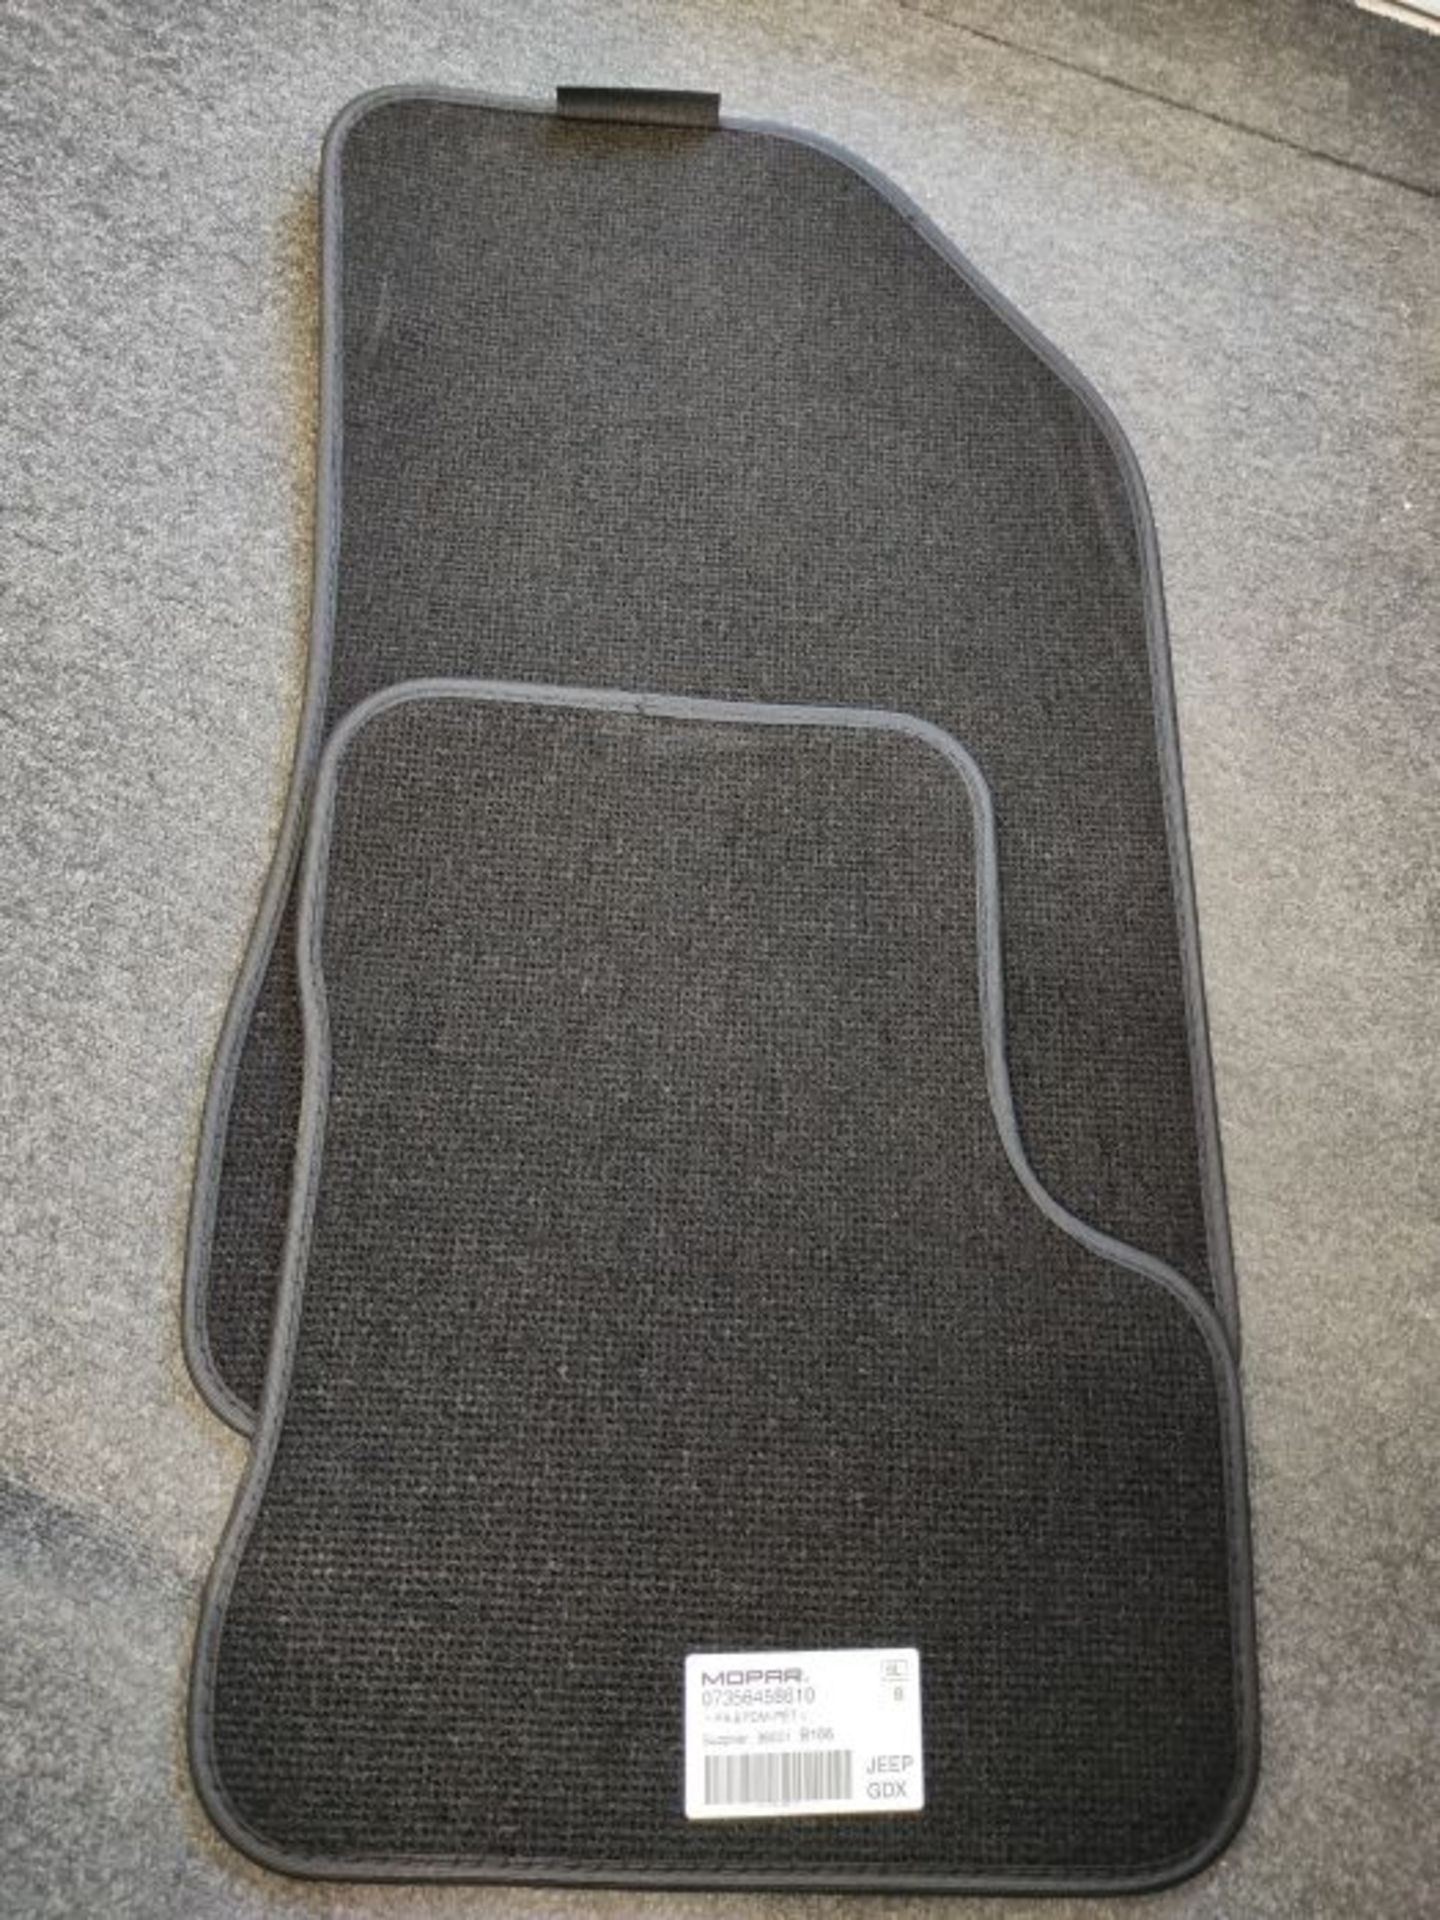 Jeep GDX Carpets x 4 - Image 2 of 2